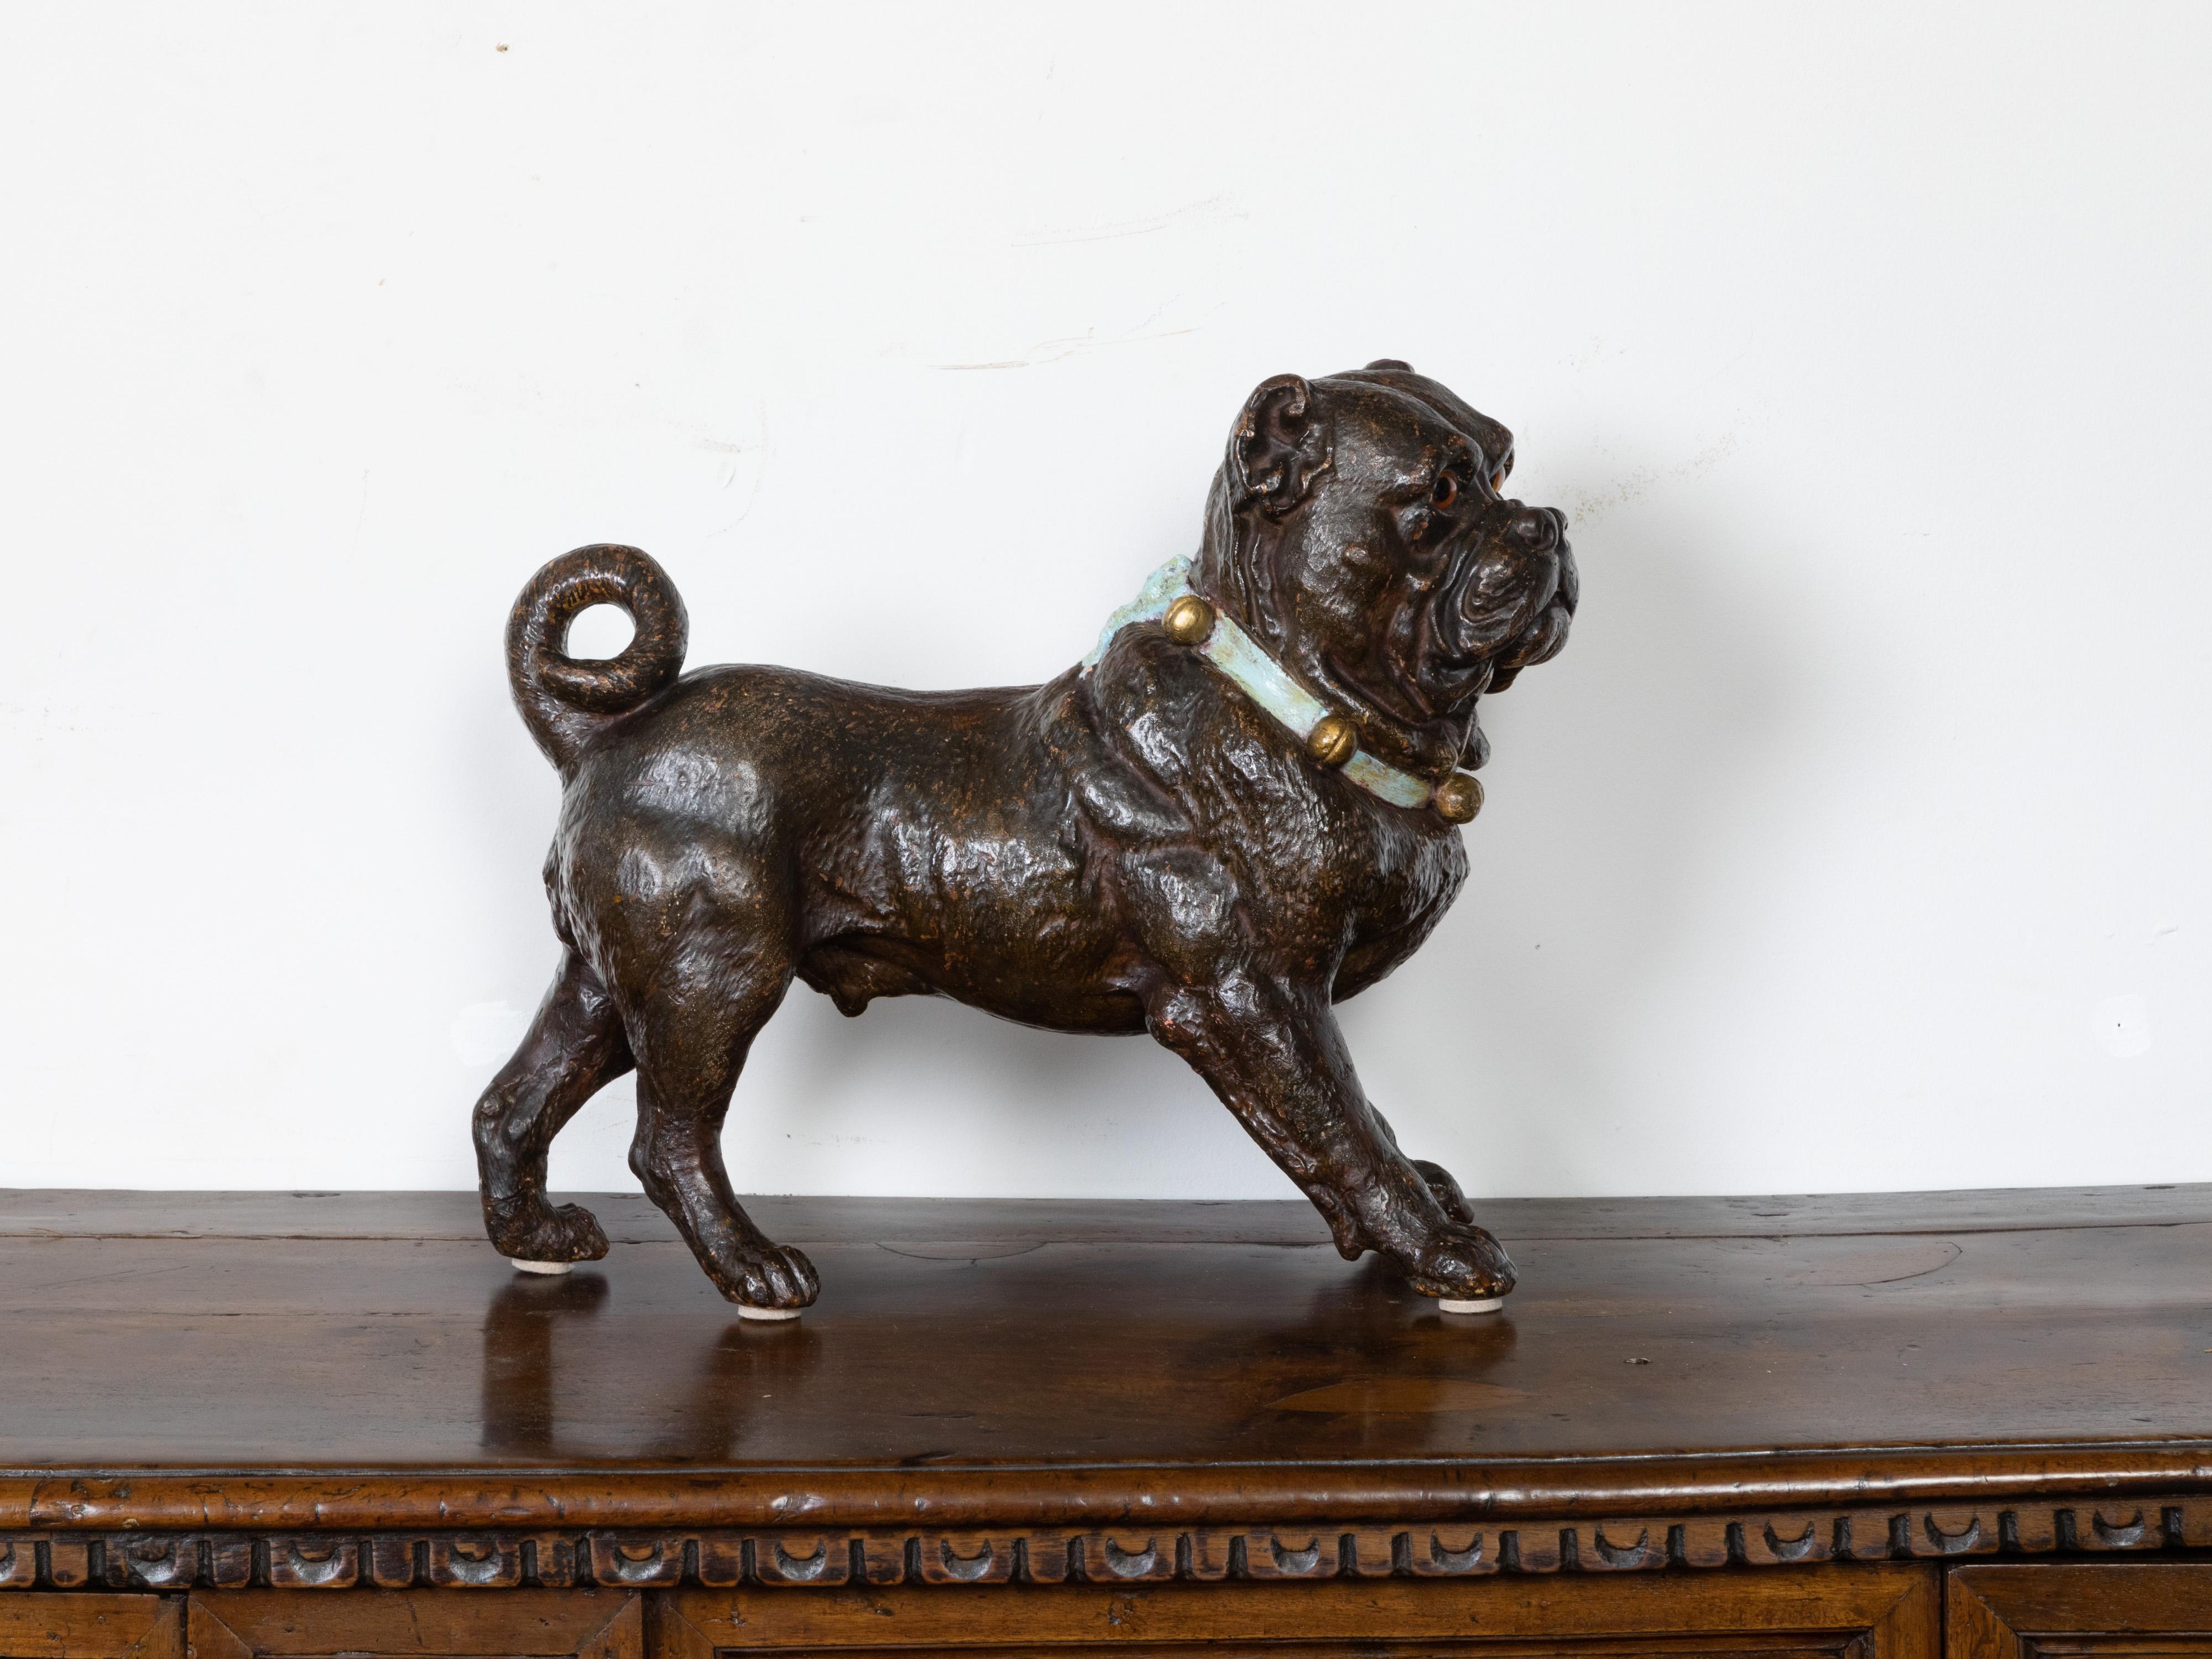 An English terracotta standing dog sculpture from the early 20th century, with glass eyes, green collar and bells. Created in England during the early years of the 20th century, this terracotta dog sculpture features a pug standing firmly on his